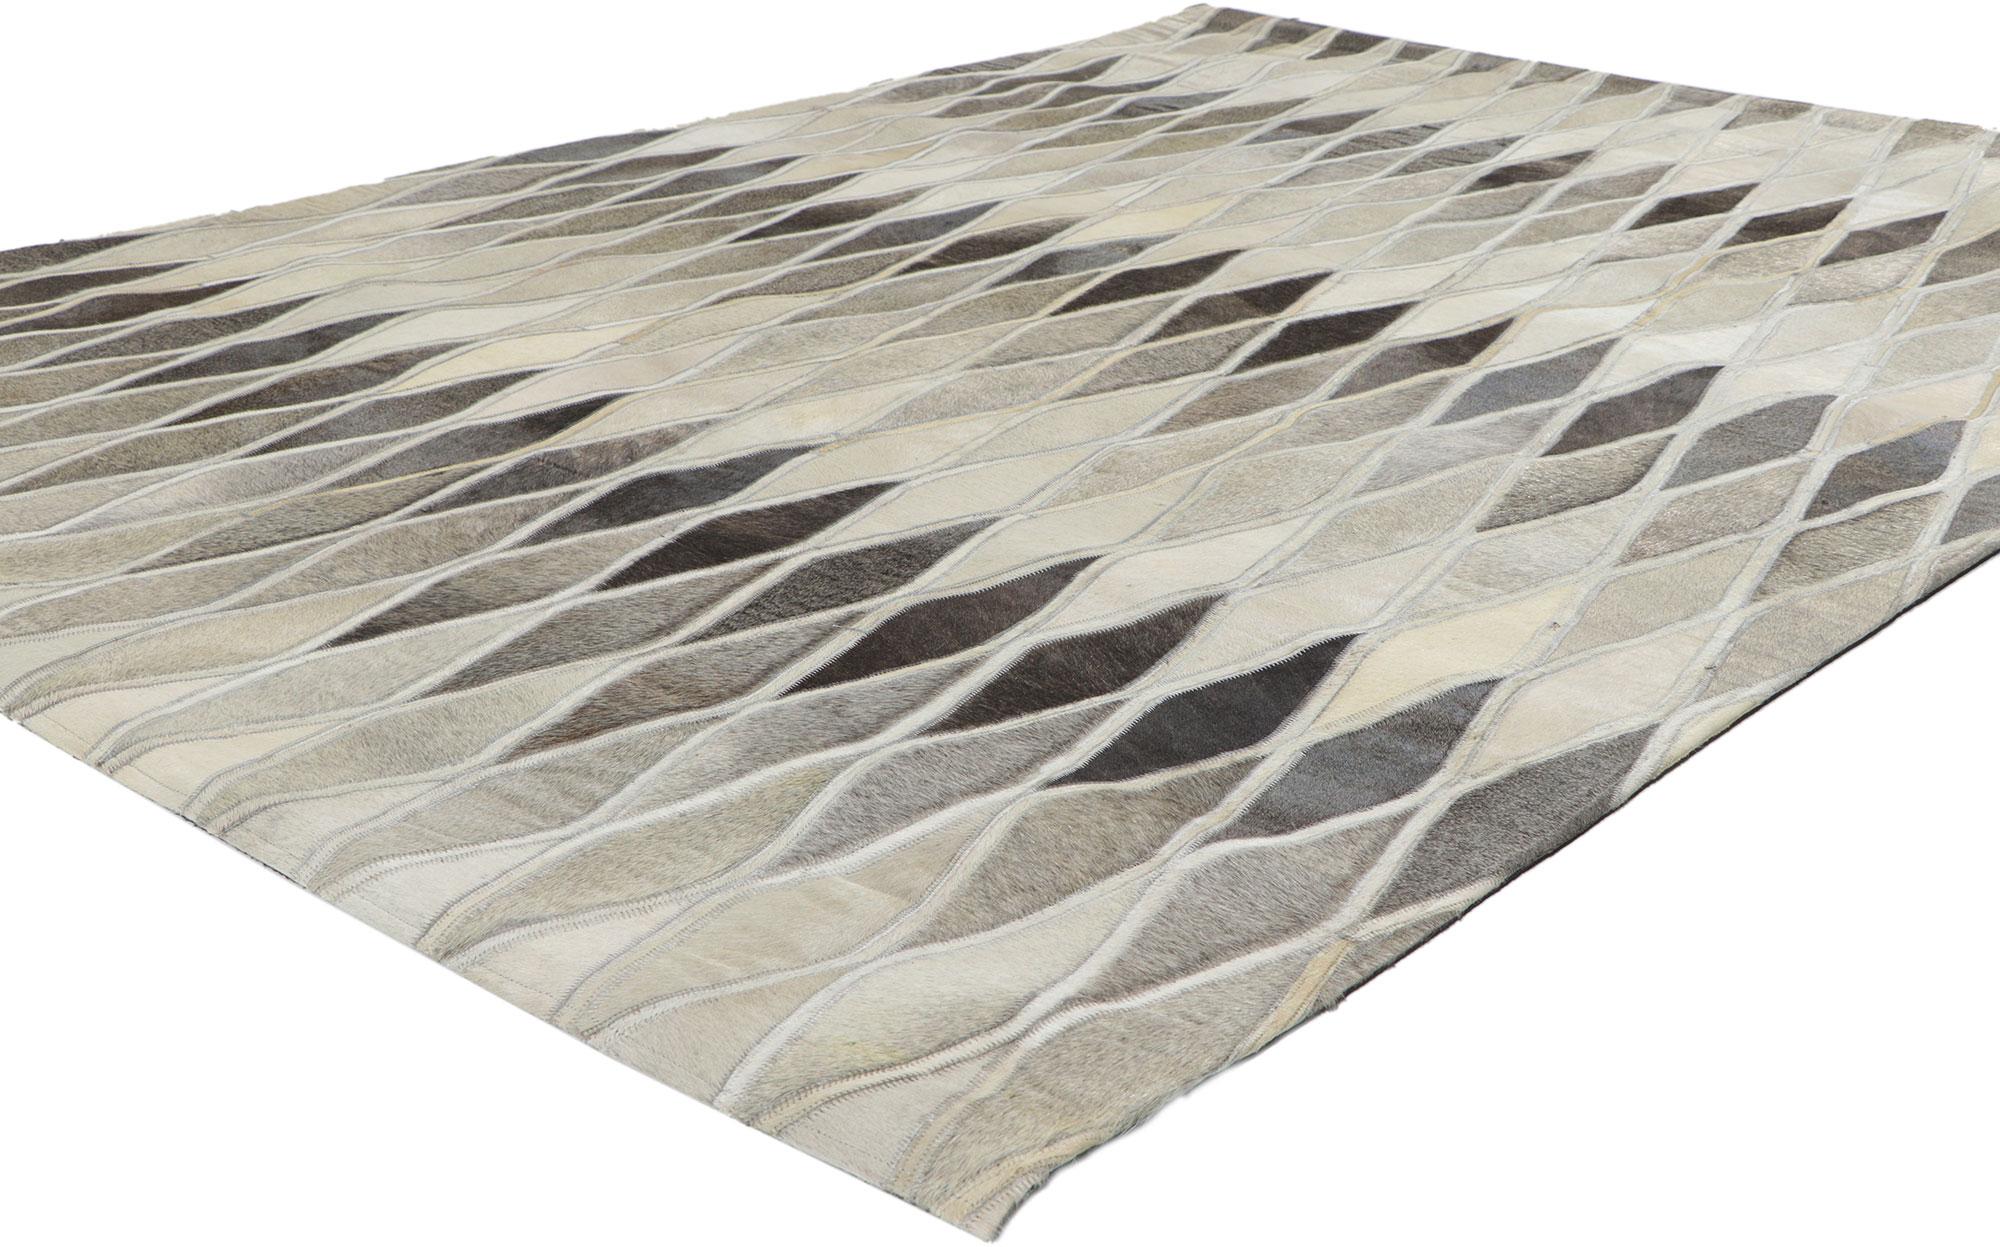 30906 Contemporary Patchwork Cowhide Rug with Modern Style, 05'04 x 07'05. Call the wild indoors and bring a sense of adventure home with this handcrafted cowhide rug. Showcasing a modern design, incredible detail and texture, this leather cowhide